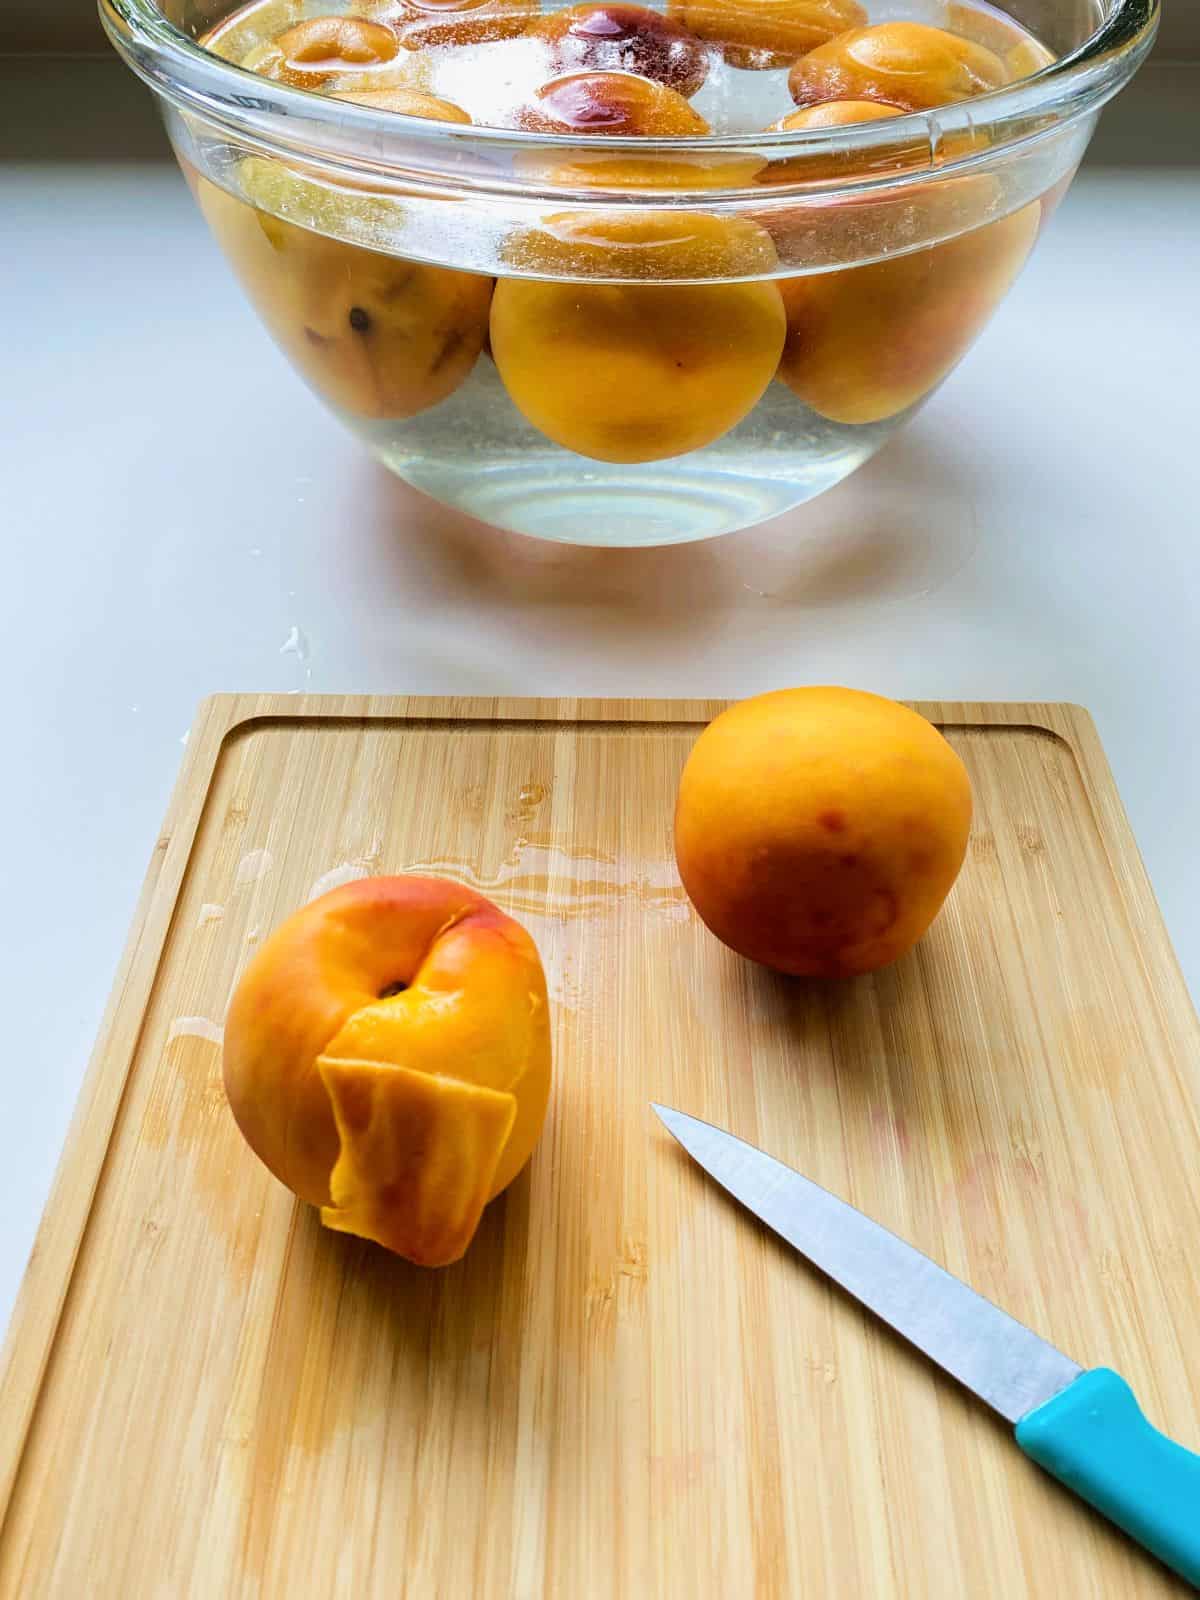 An image of peaches that have been blanched, waiting to be peeled before freezing.